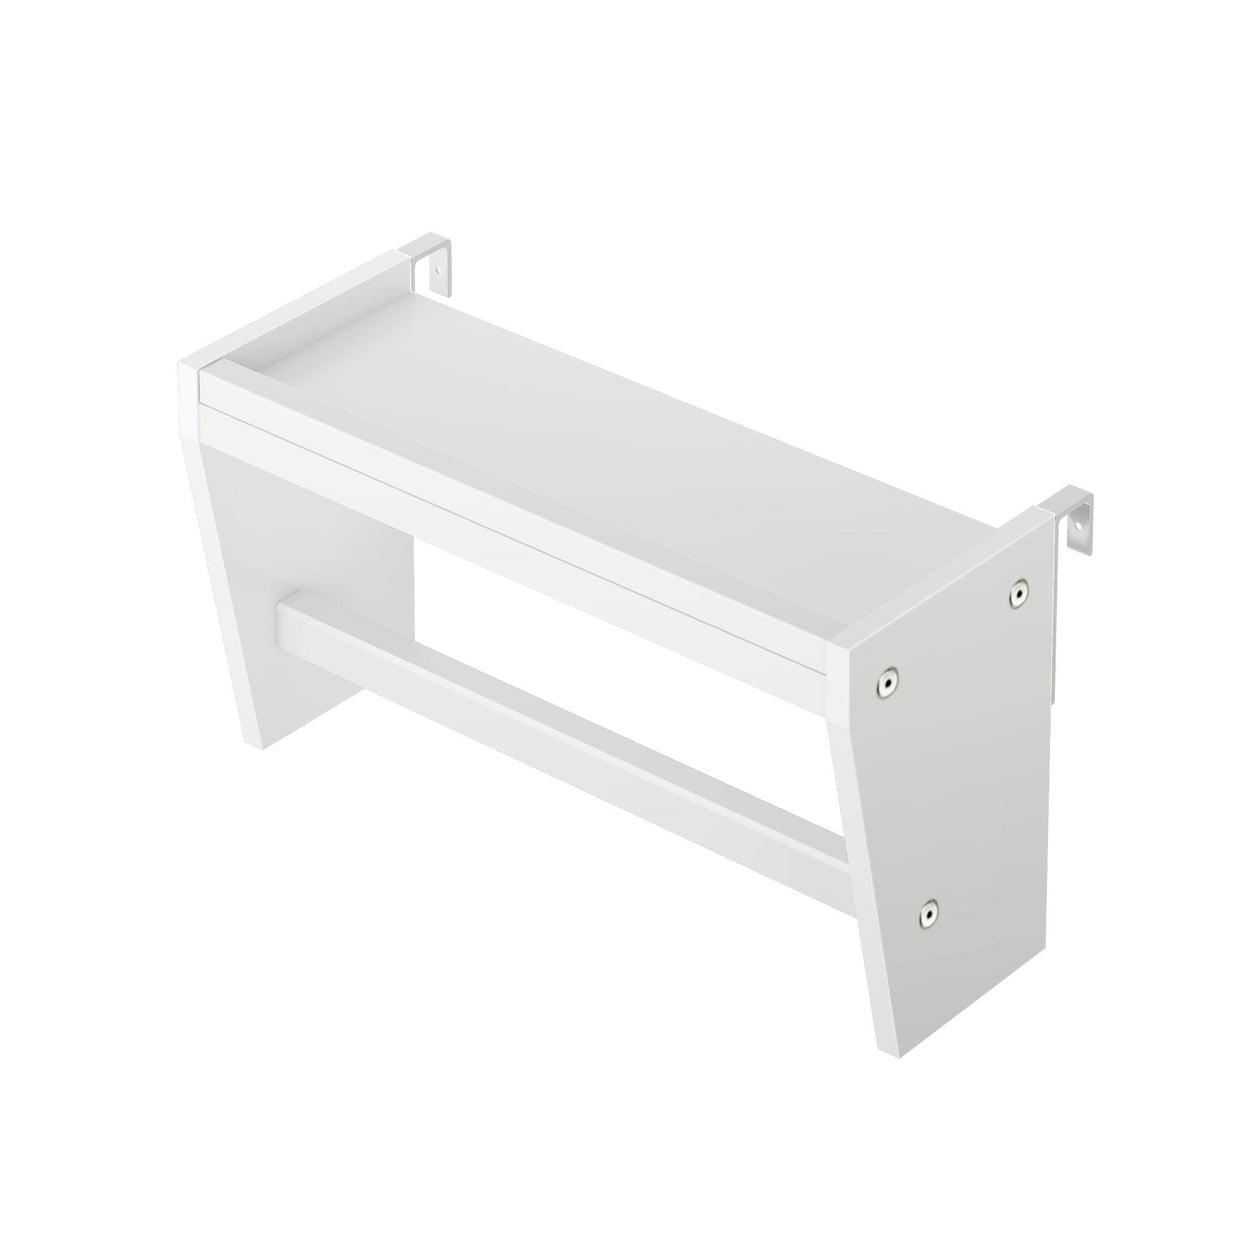 180099-002 : Furniture Bedside Tray, White